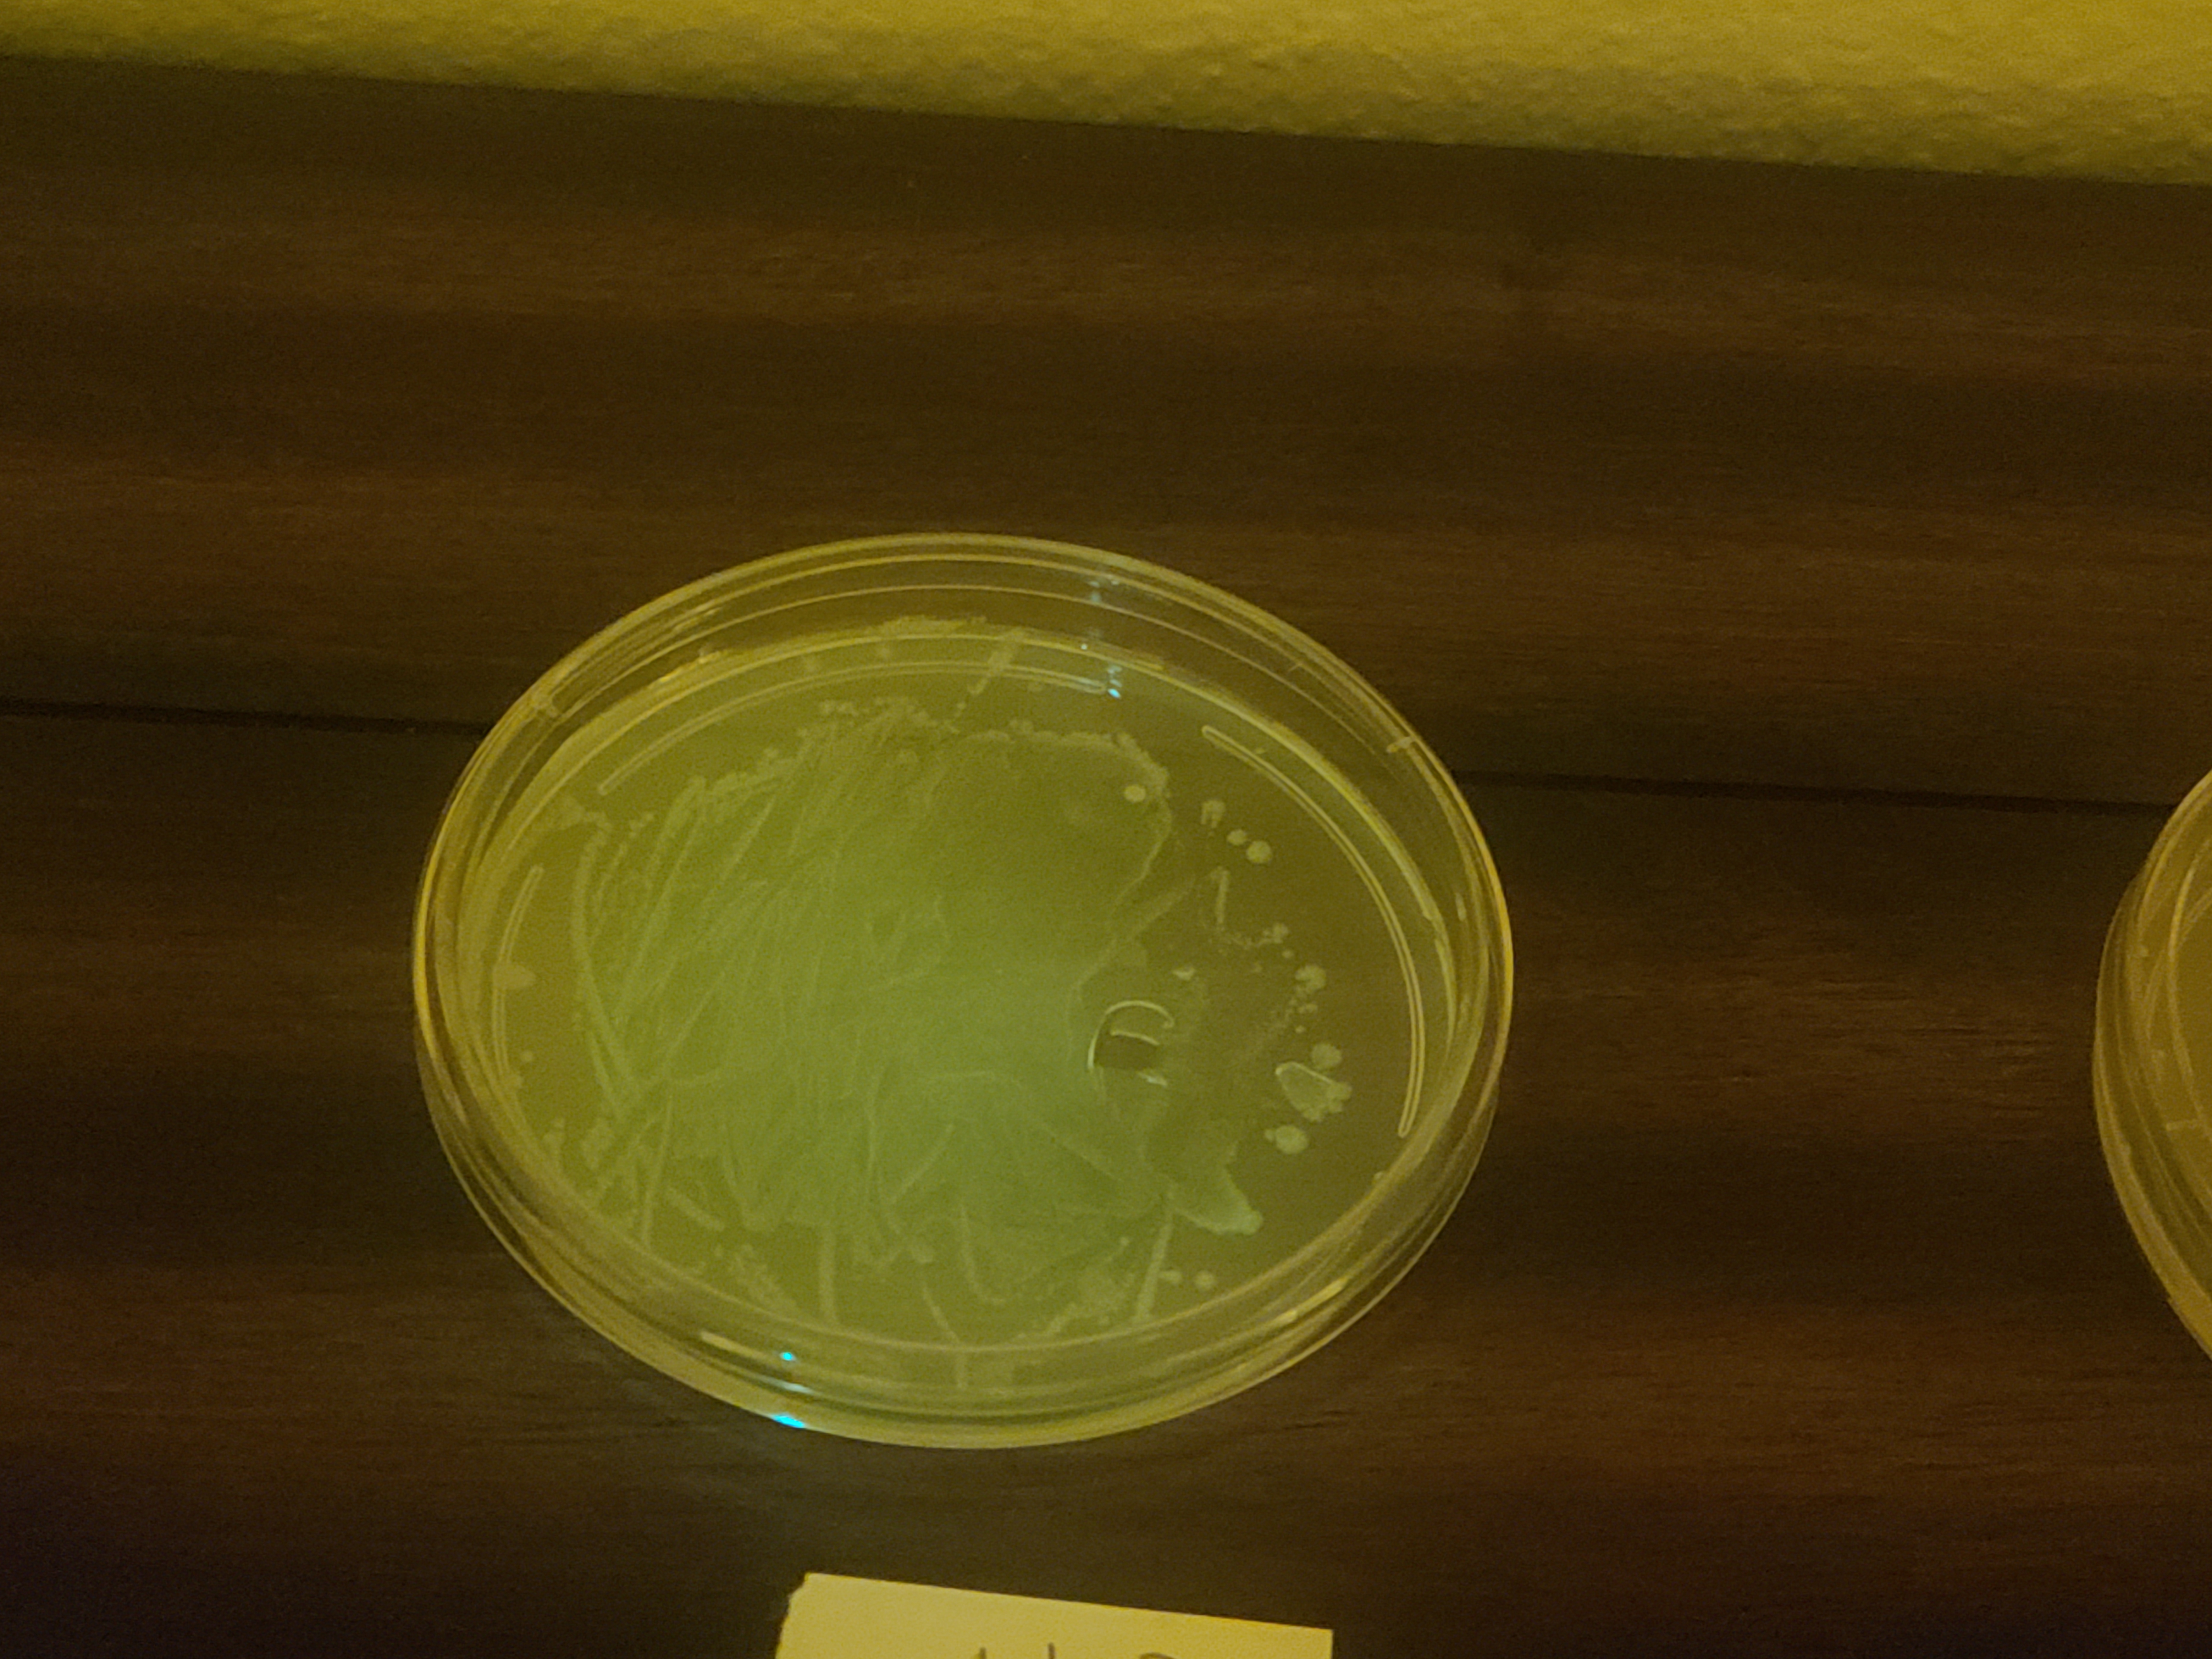 Control Petri Dish - shows up green, but without bright colony spots